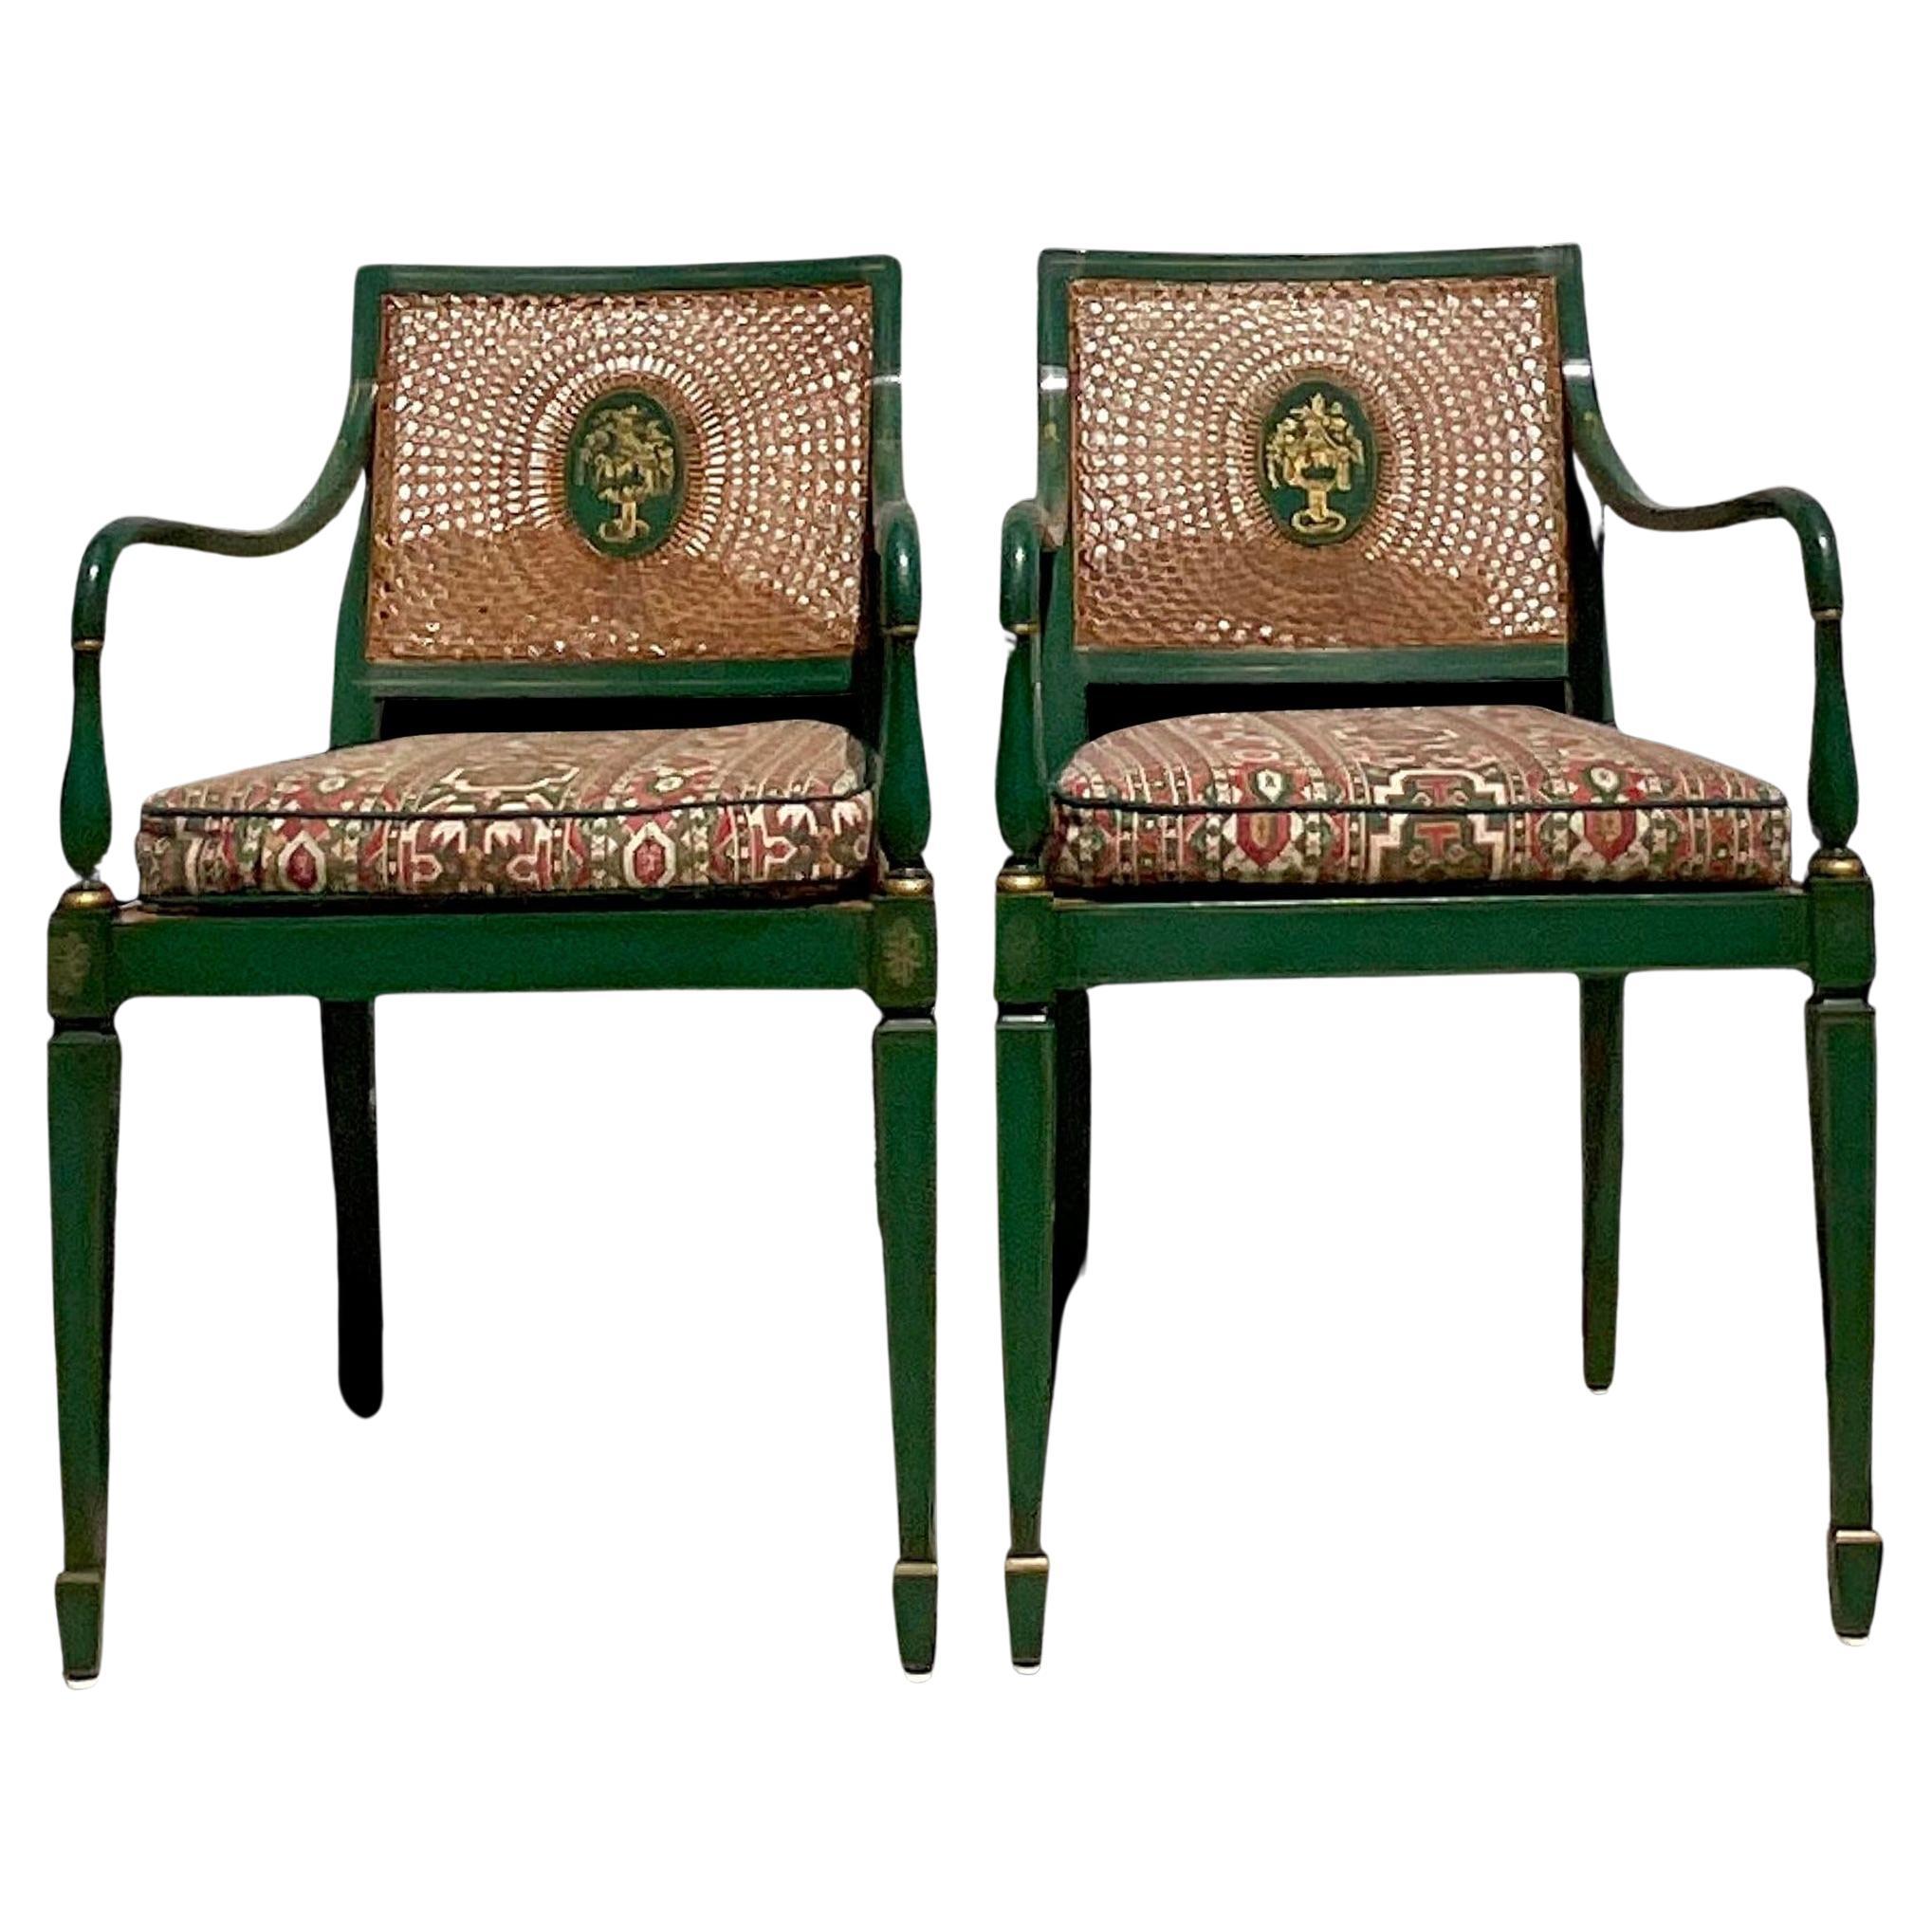 Vintage Regency Carver Cane Chairs - a Pair For Sale